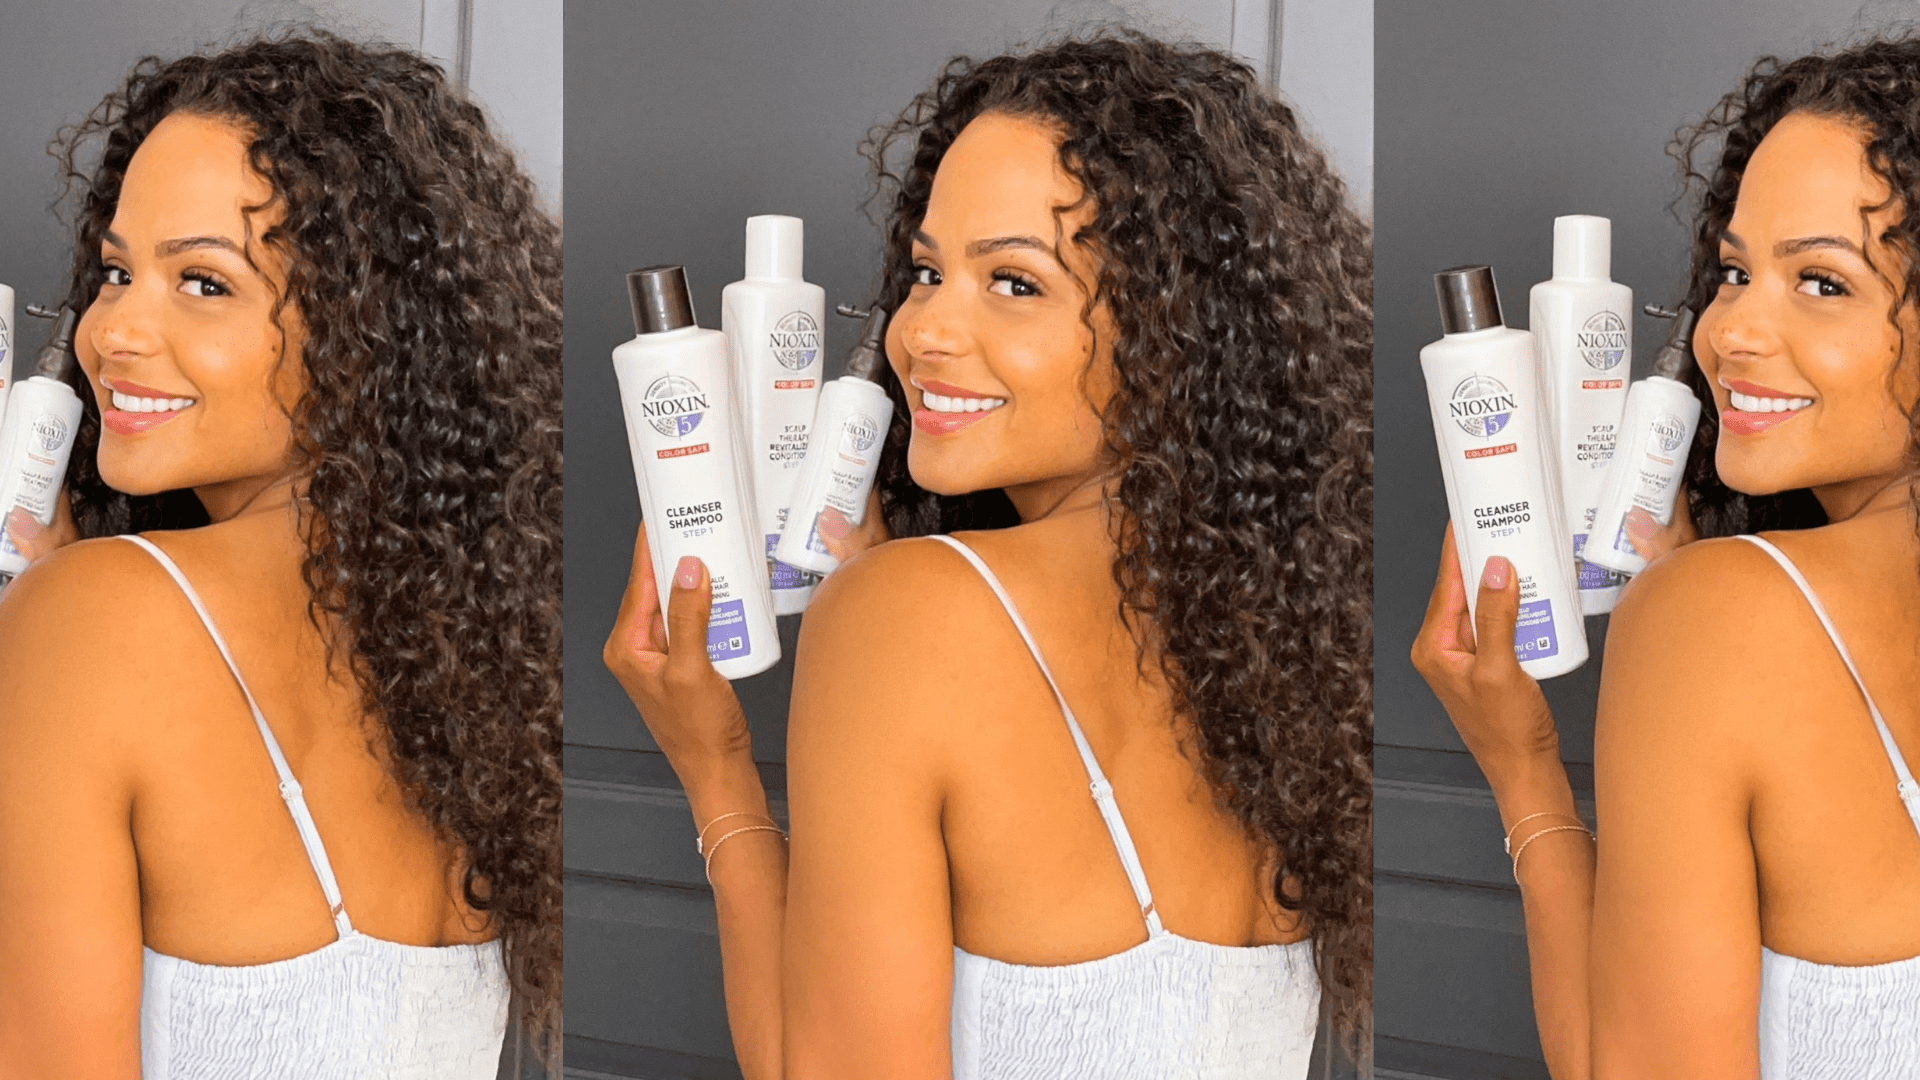 Christina Milian Swears by These Nioxin Products for Postpartum Hair Loss -  The Tease